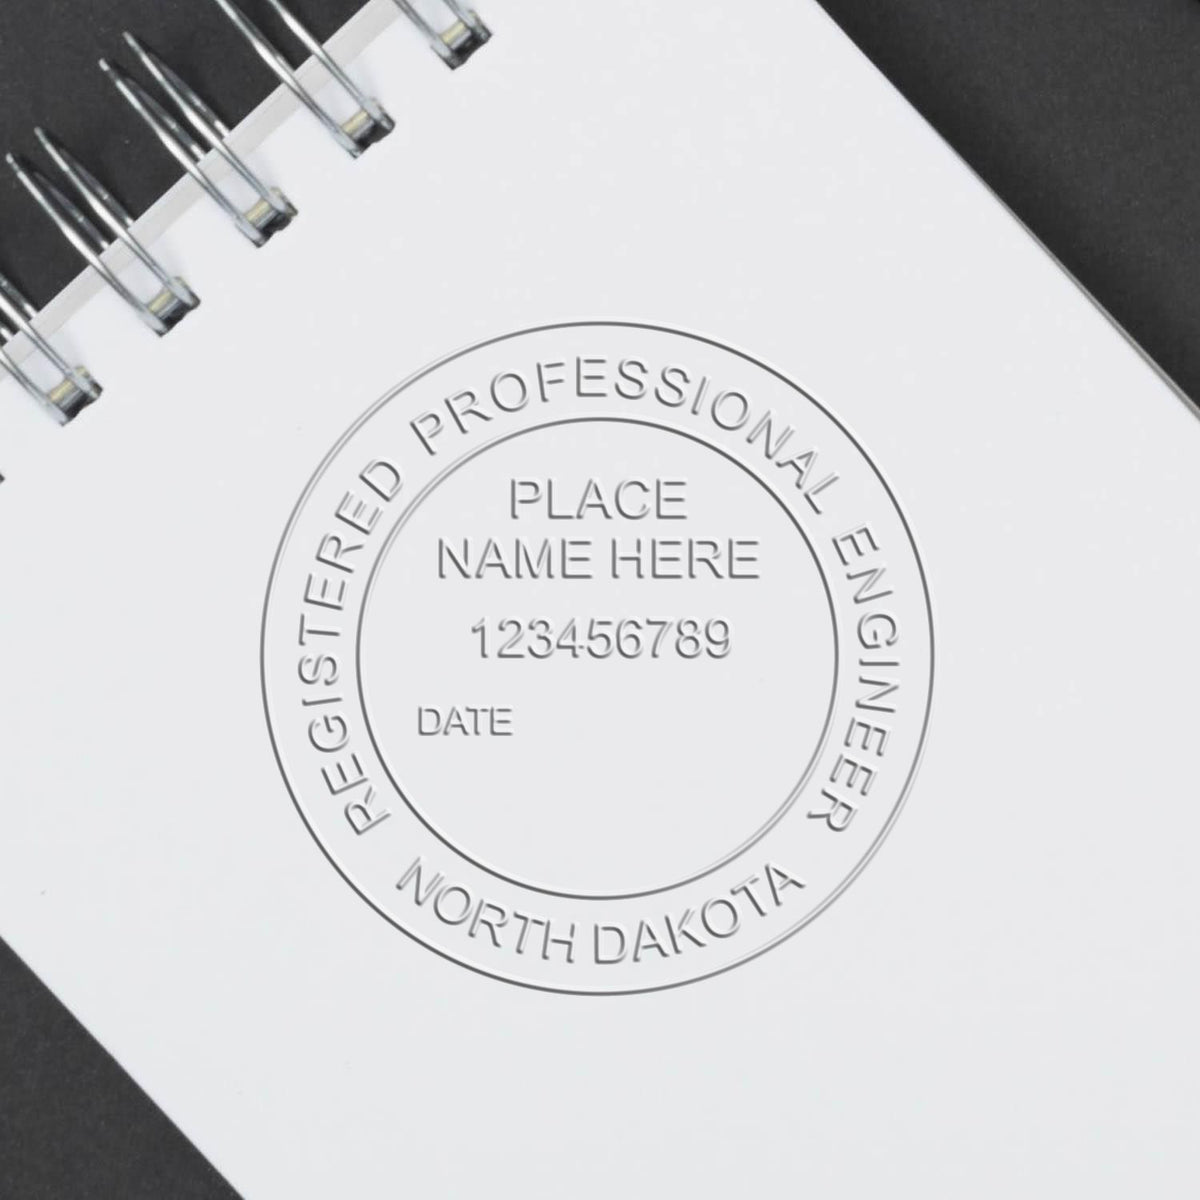 A lifestyle photo showing a stamped image of the Handheld North Dakota Professional Engineer Embosser on a piece of paper